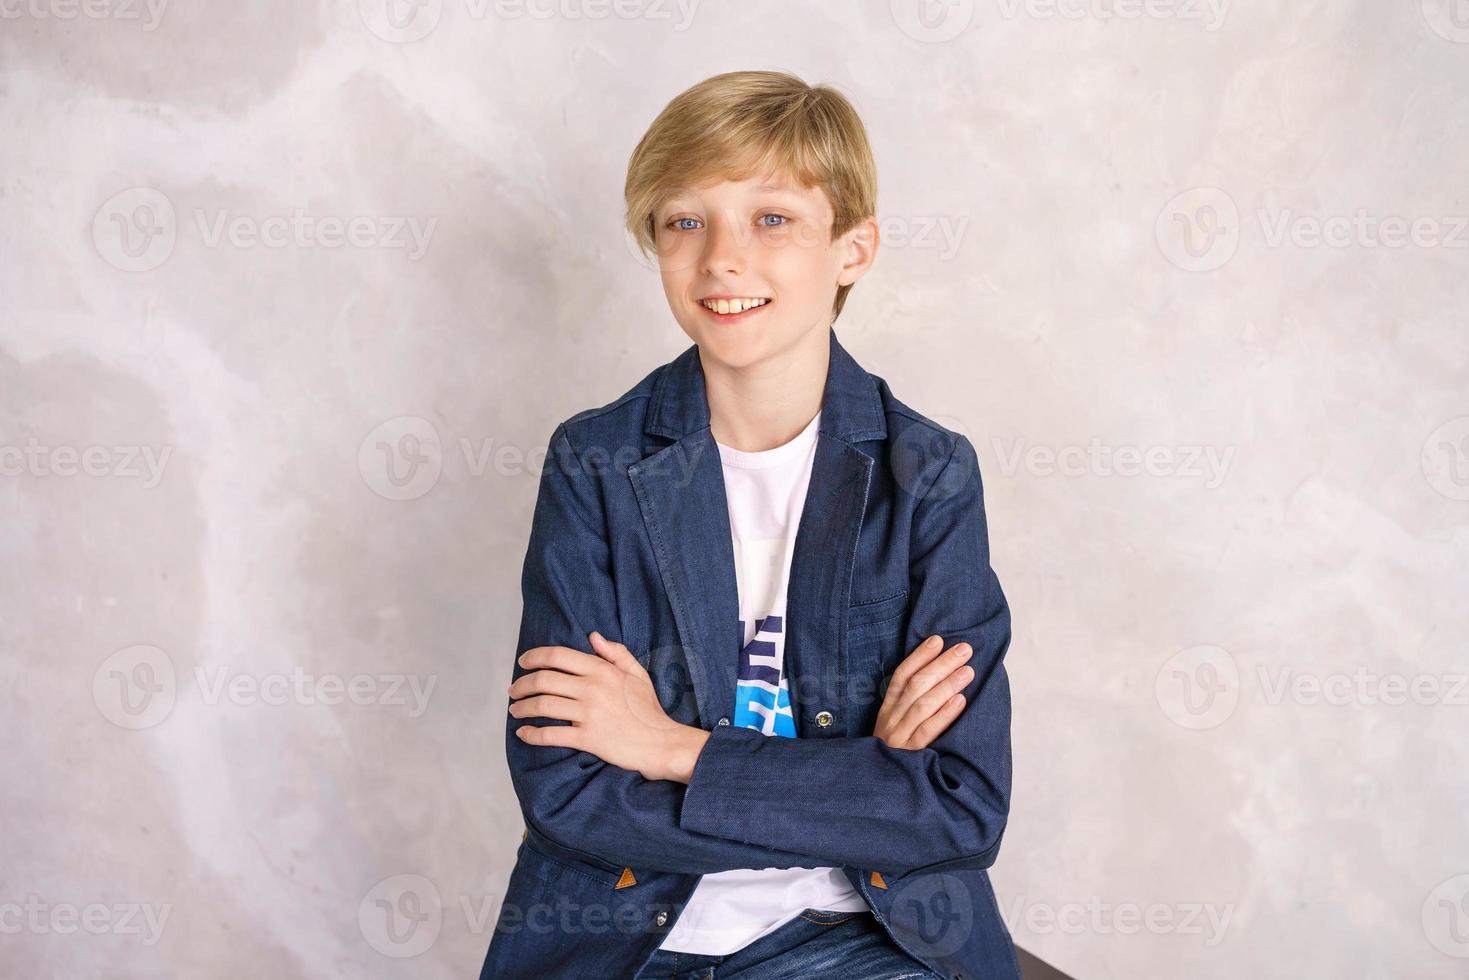 guy posing in the studio on a light wall background photo